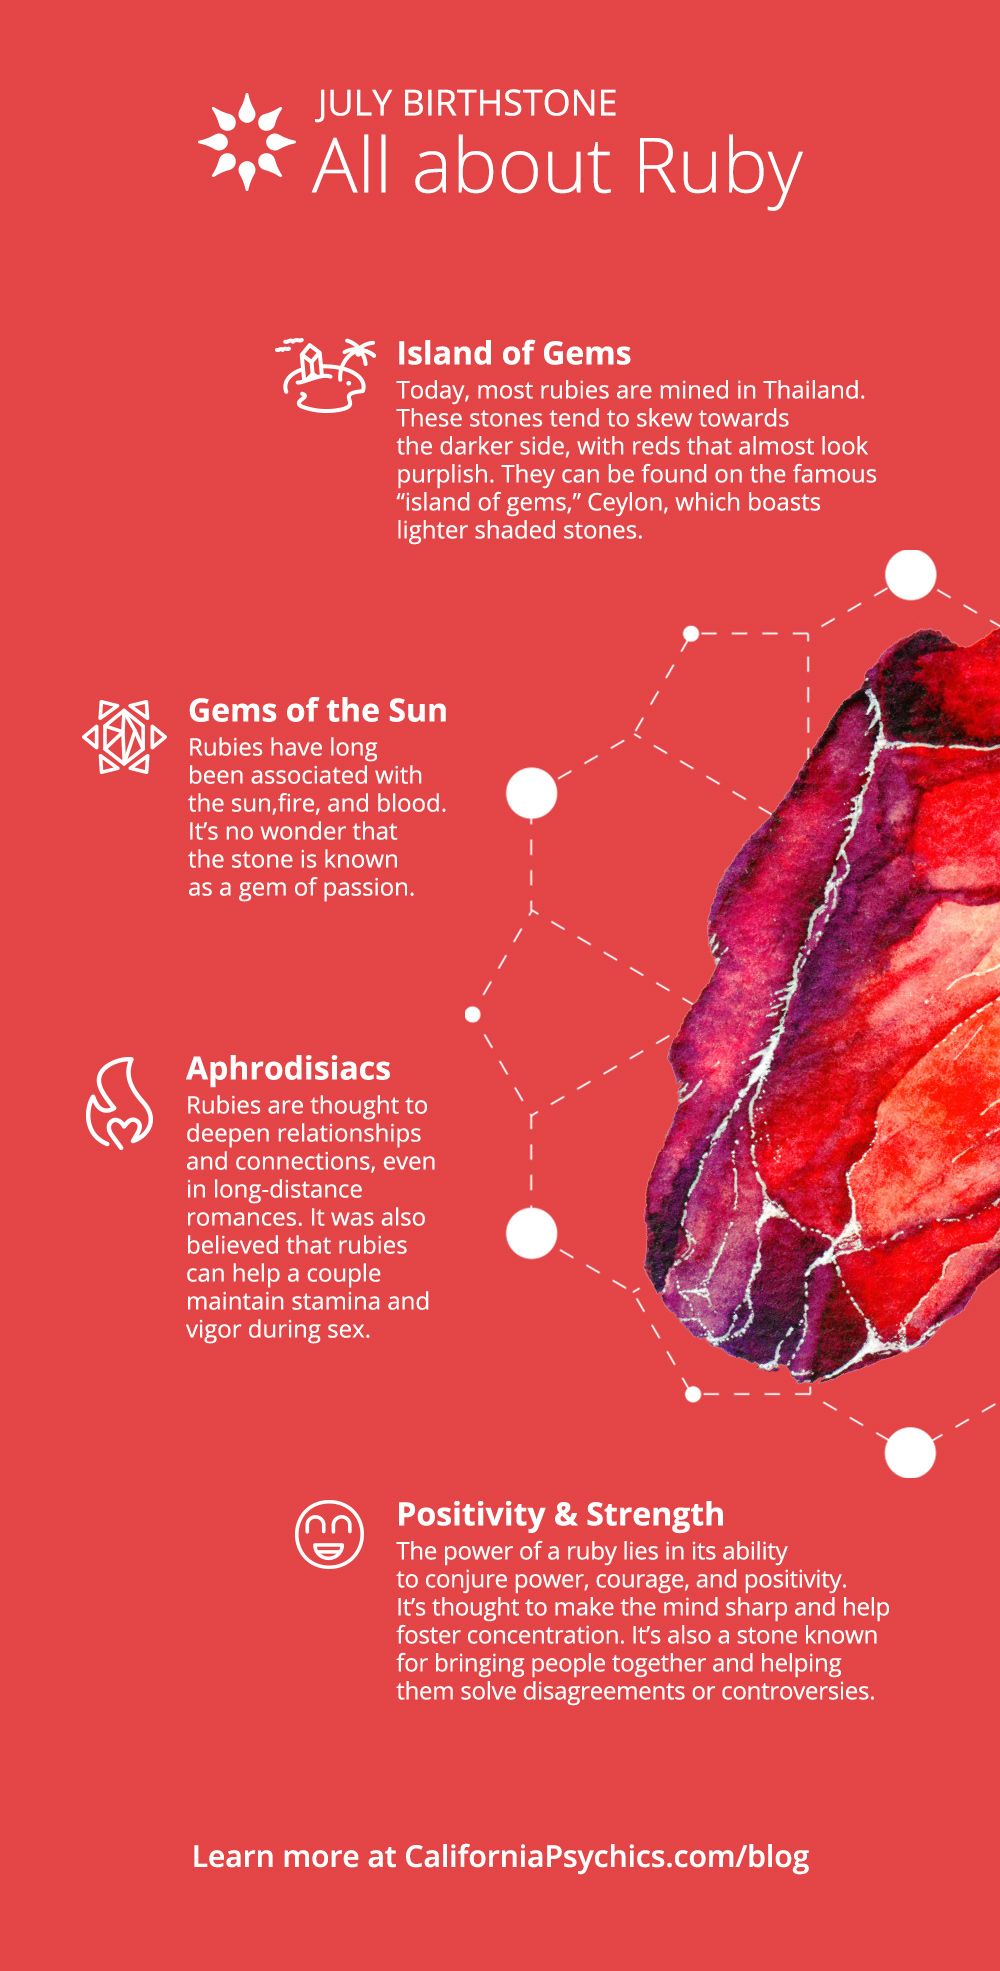 All About #Ruby: The July #Birthstone | Birthstones, Crystal healing